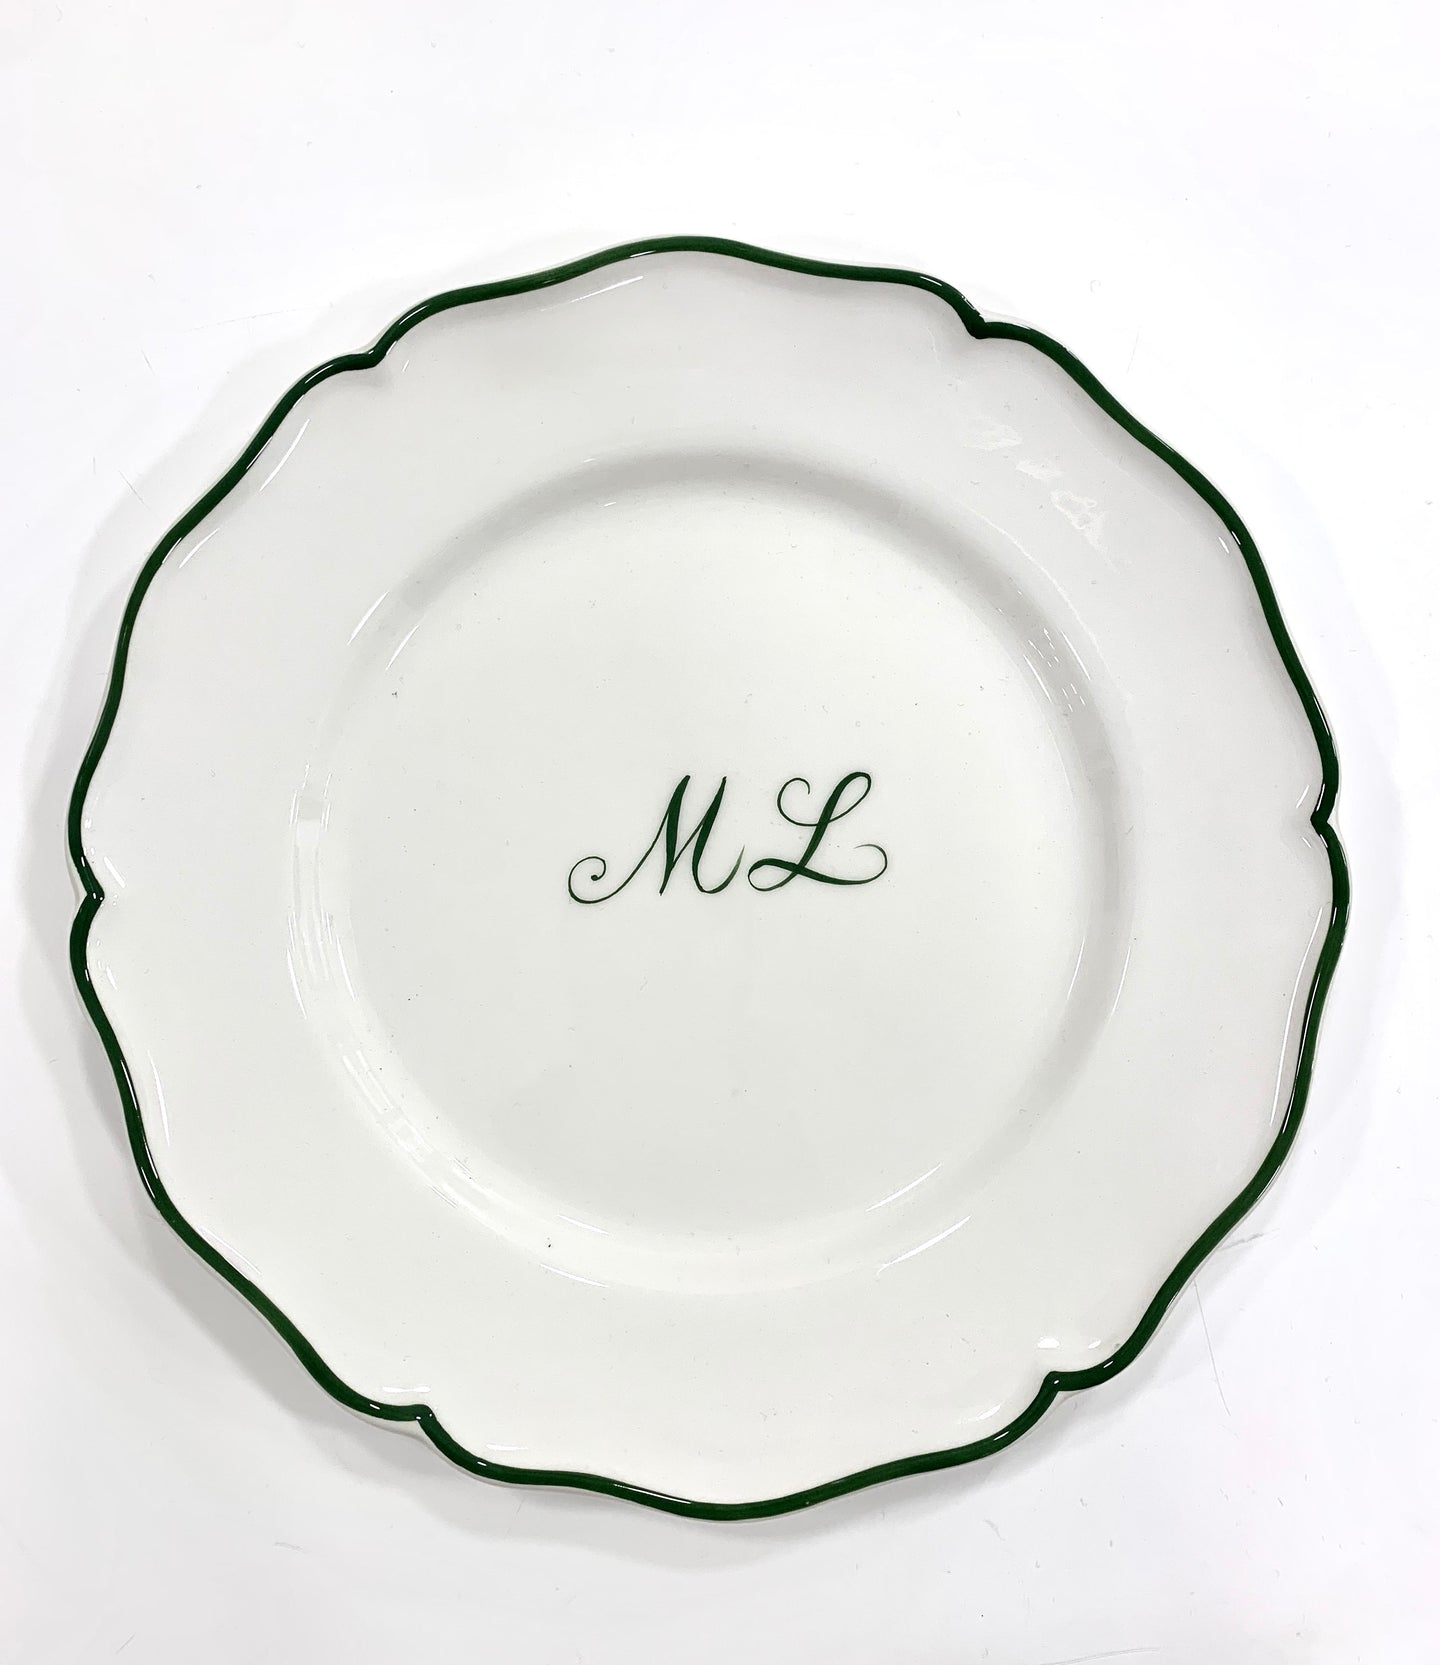 DINNER PLATE with MONOGRAM